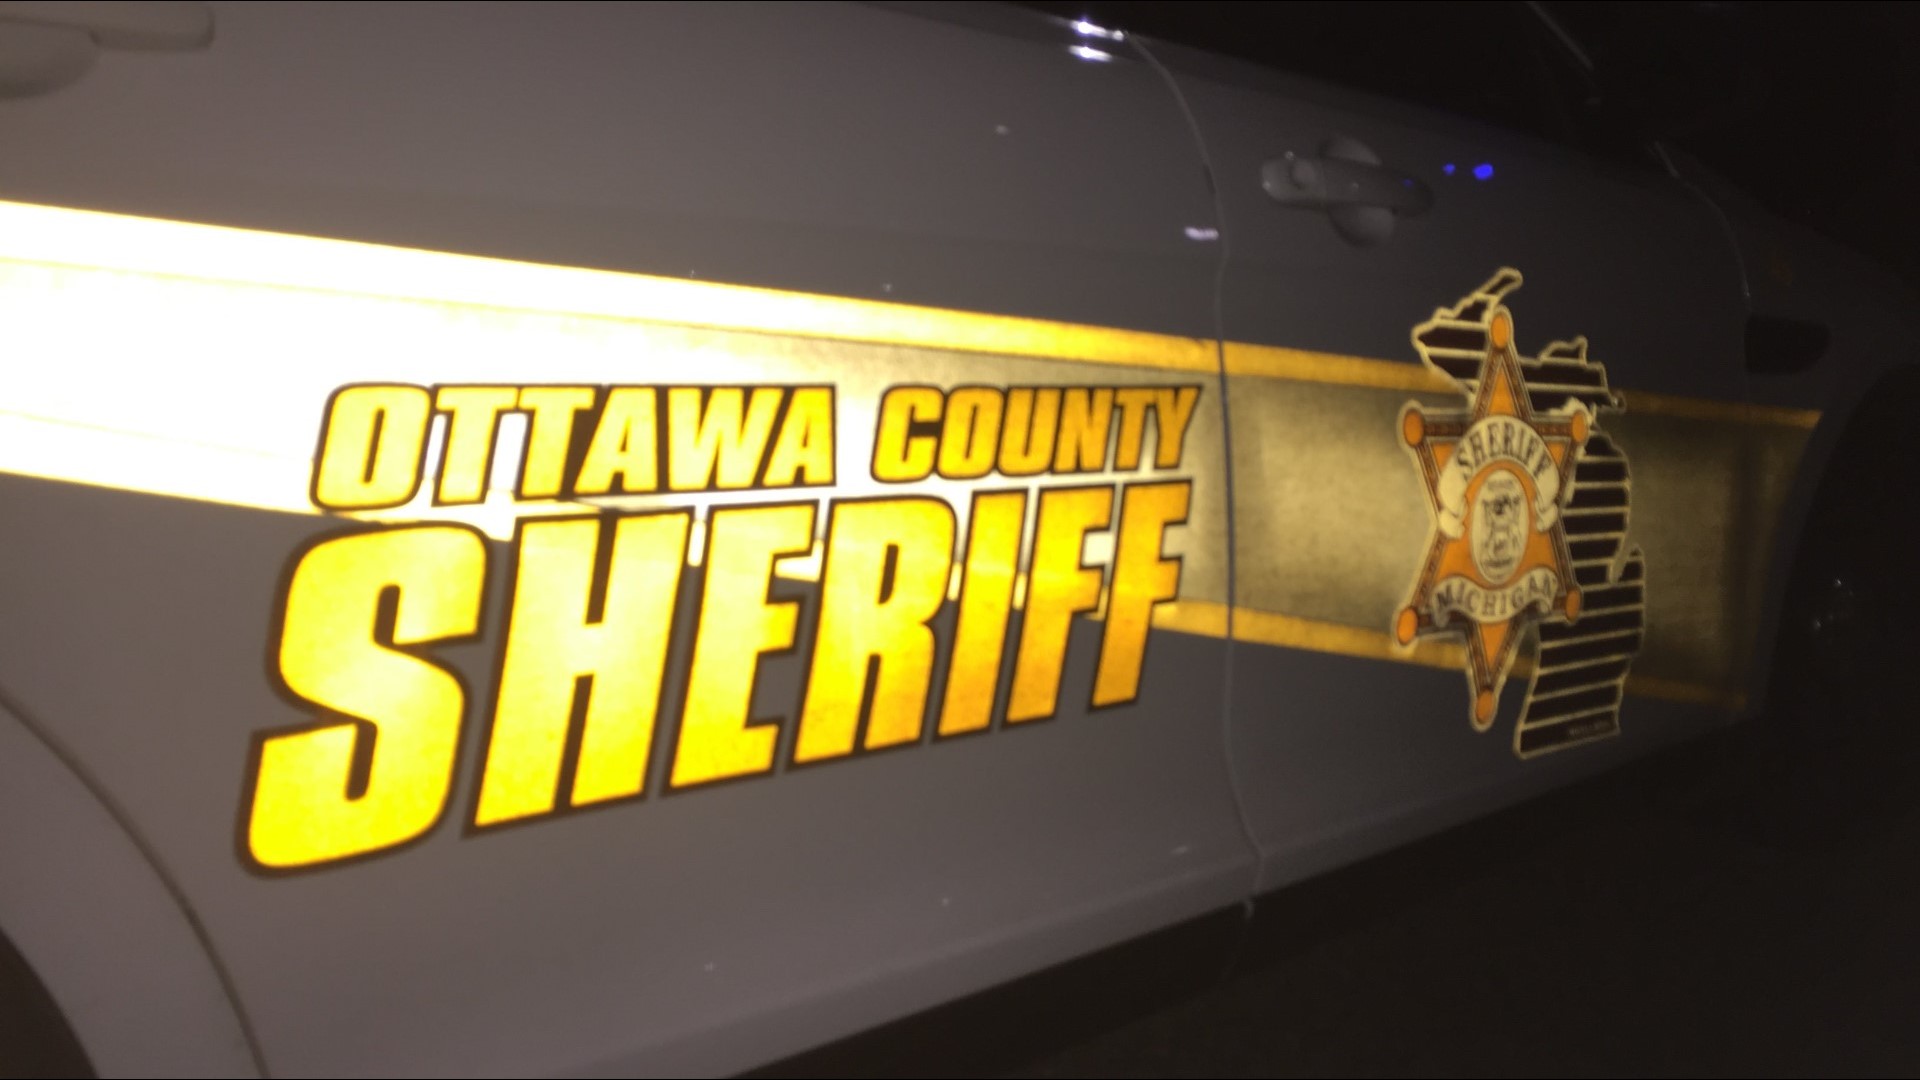 The Ottawa County Sheriff's Office is investigating a report of sexual assault that allegedly occurred early Sunday morning.